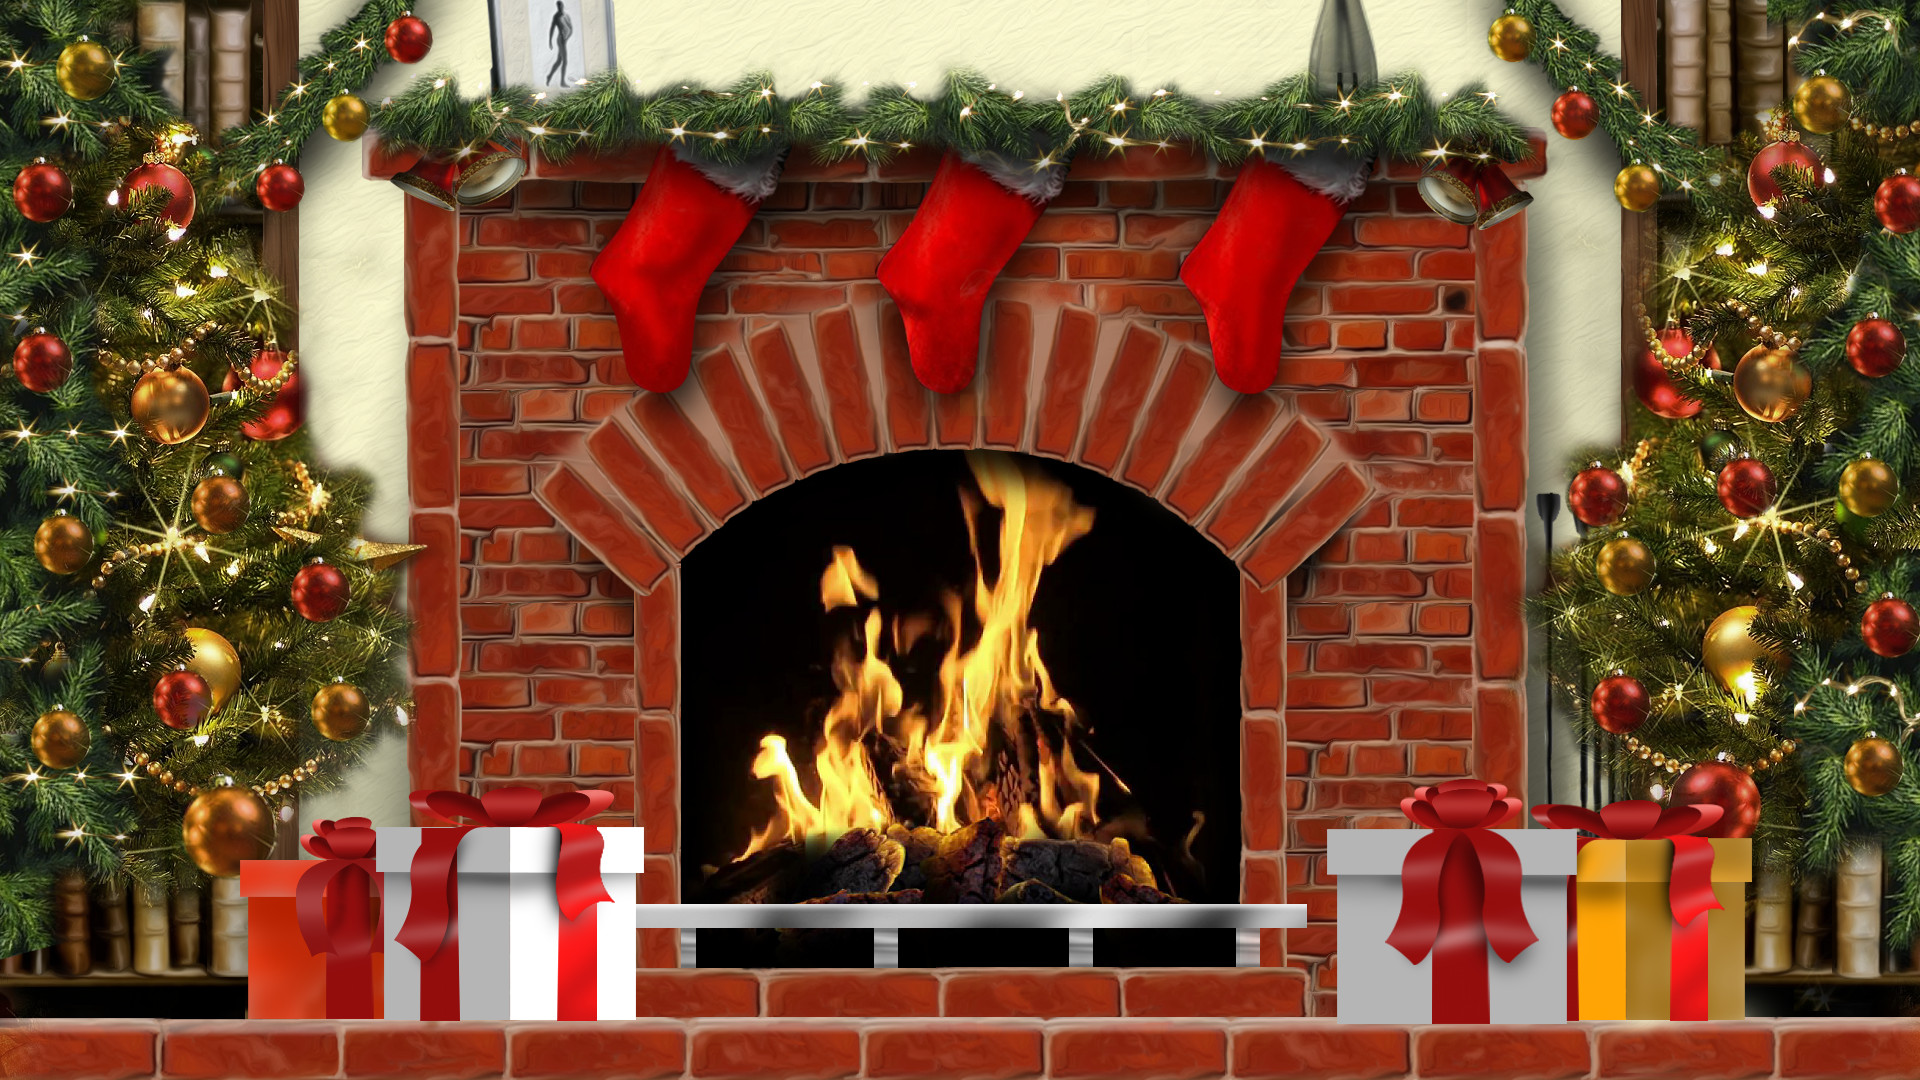 Fireplace At Christmas
 Amazing Christmas Fireplaces App Ranking and Store Data